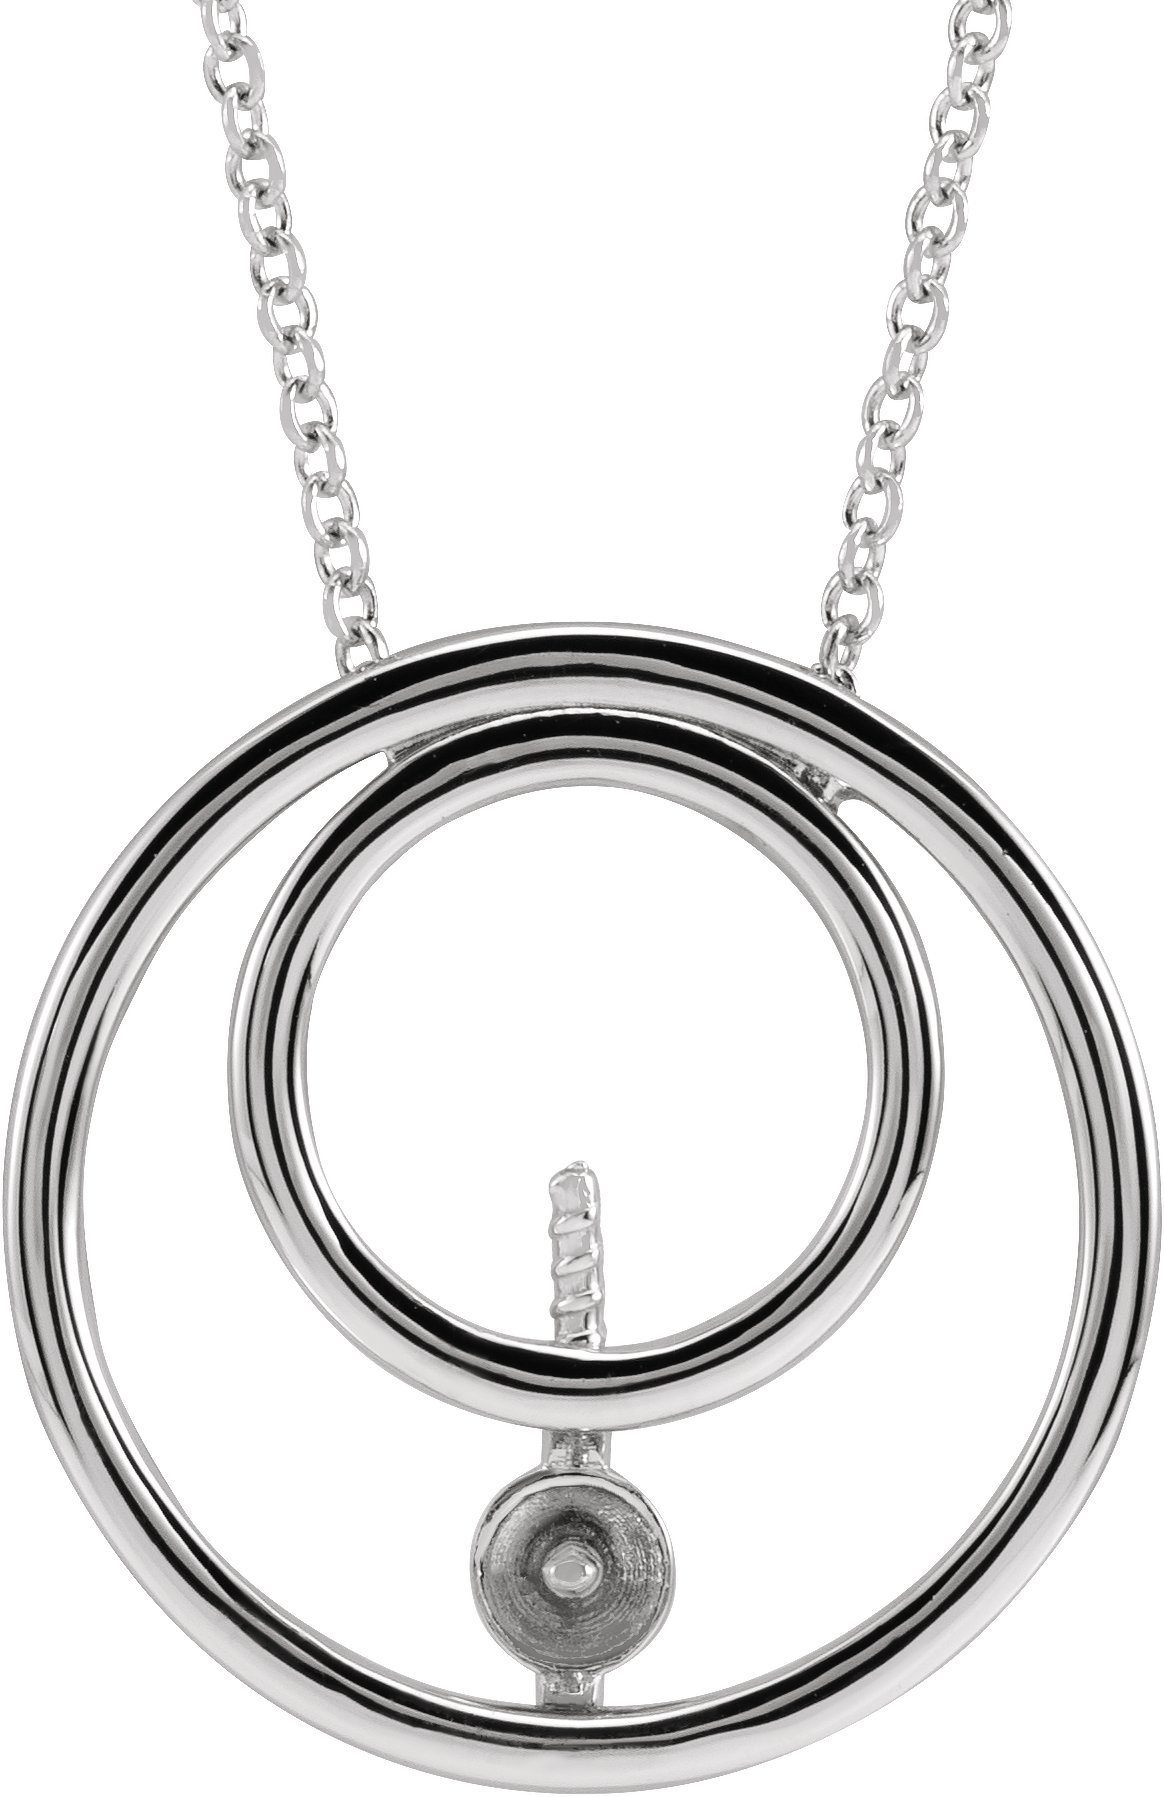 87103 / NECKLACE / Neosadený / Sterling Silver / 16-18 In / Poliert / Family Necklace Mounting